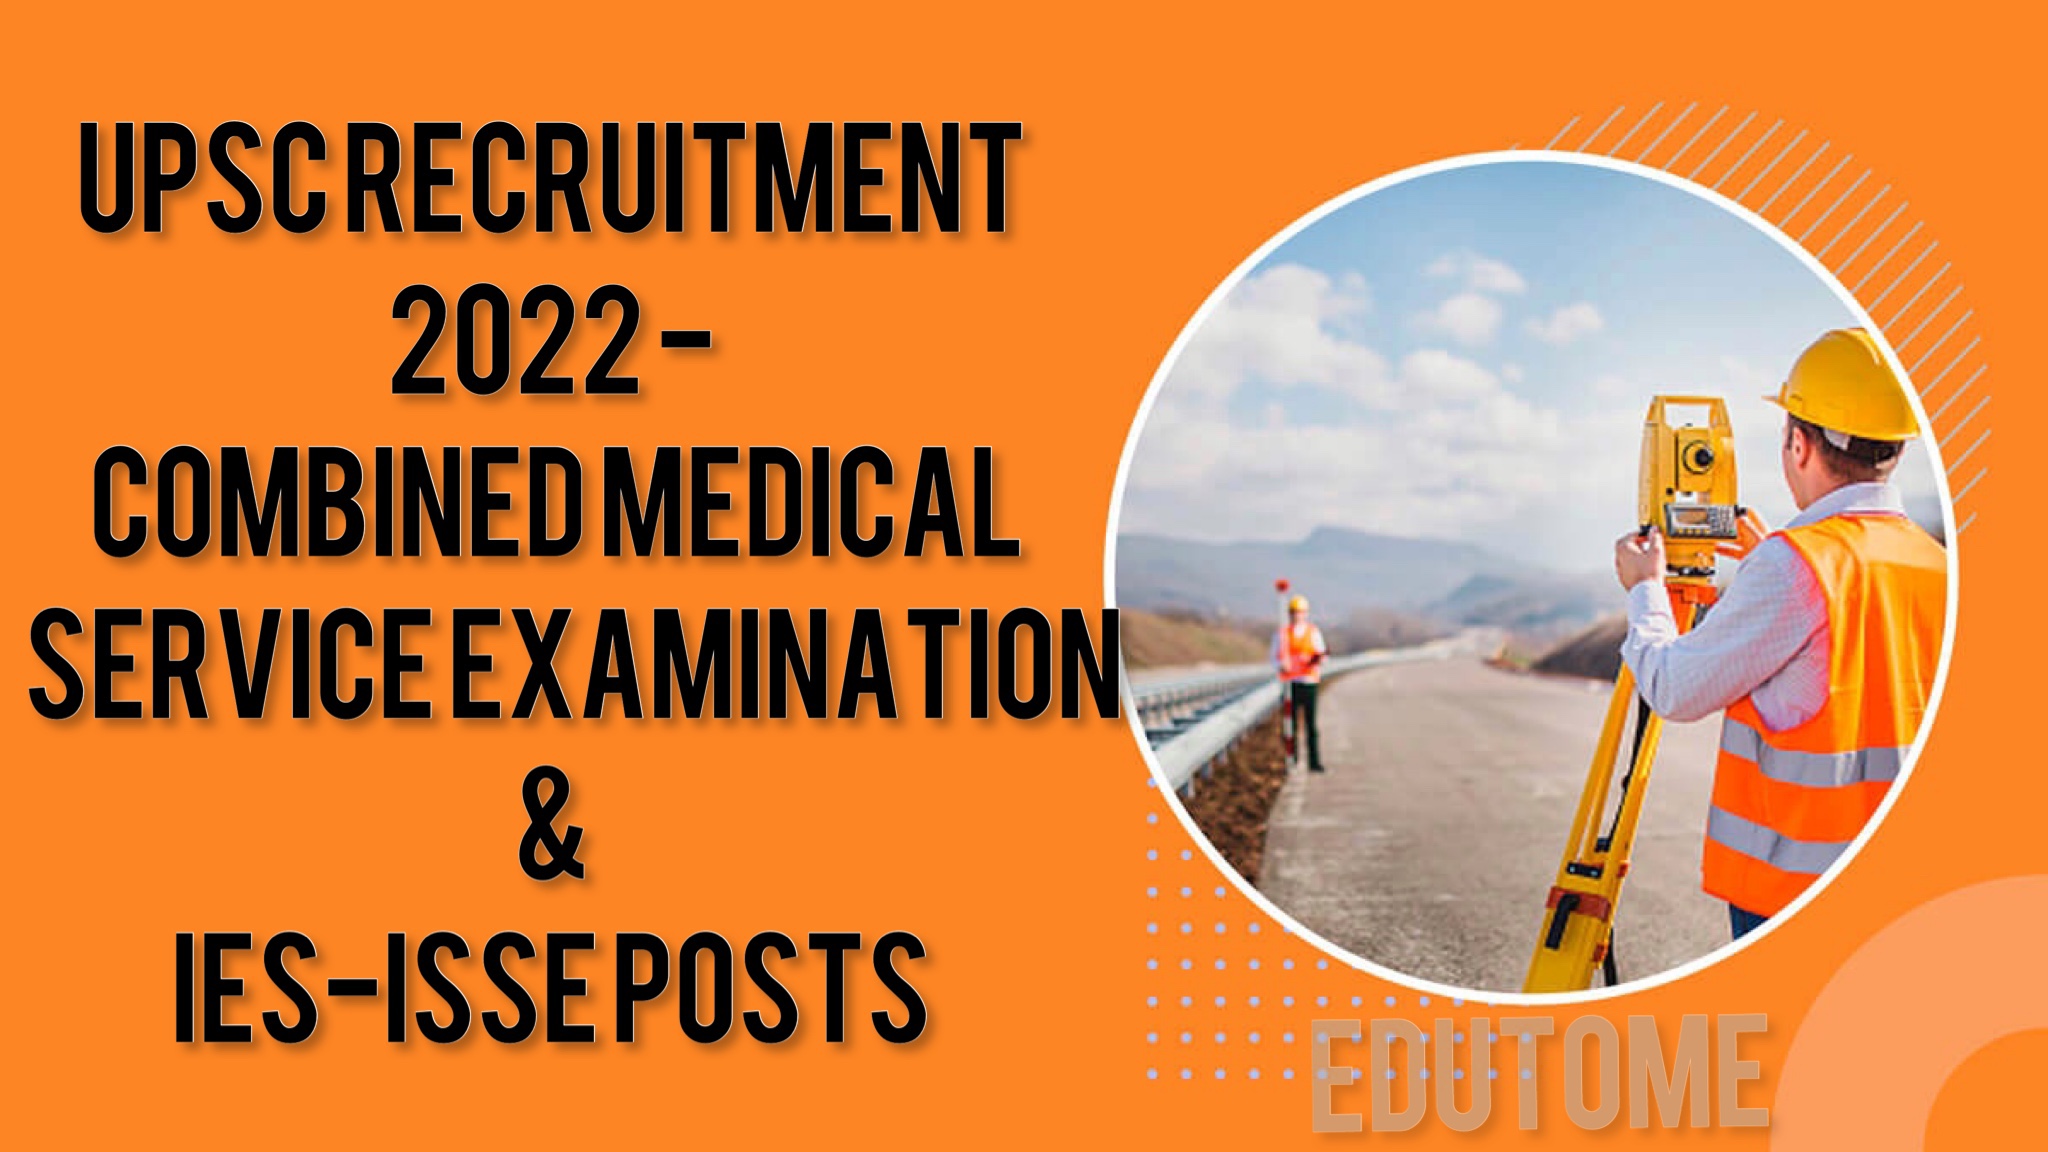 UPSC Recruitment 2022 - Apply Online For 740 Combined Medical Service Examination & IES-ISSE Posts